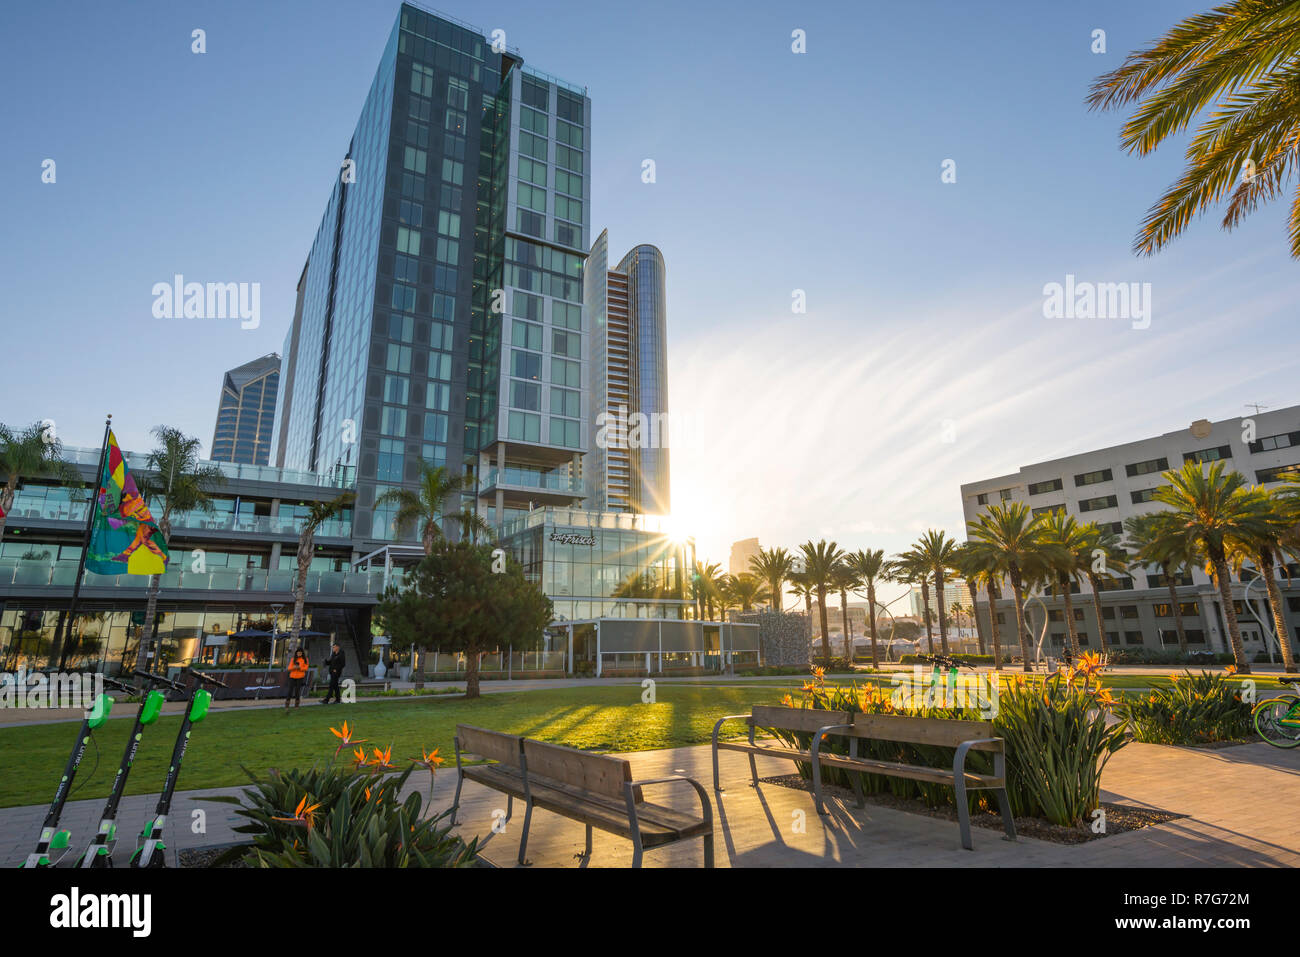 Downtown San Diego, California, USA. View of the Intercontinental San Diego hotel in the early morning. Stock Photo